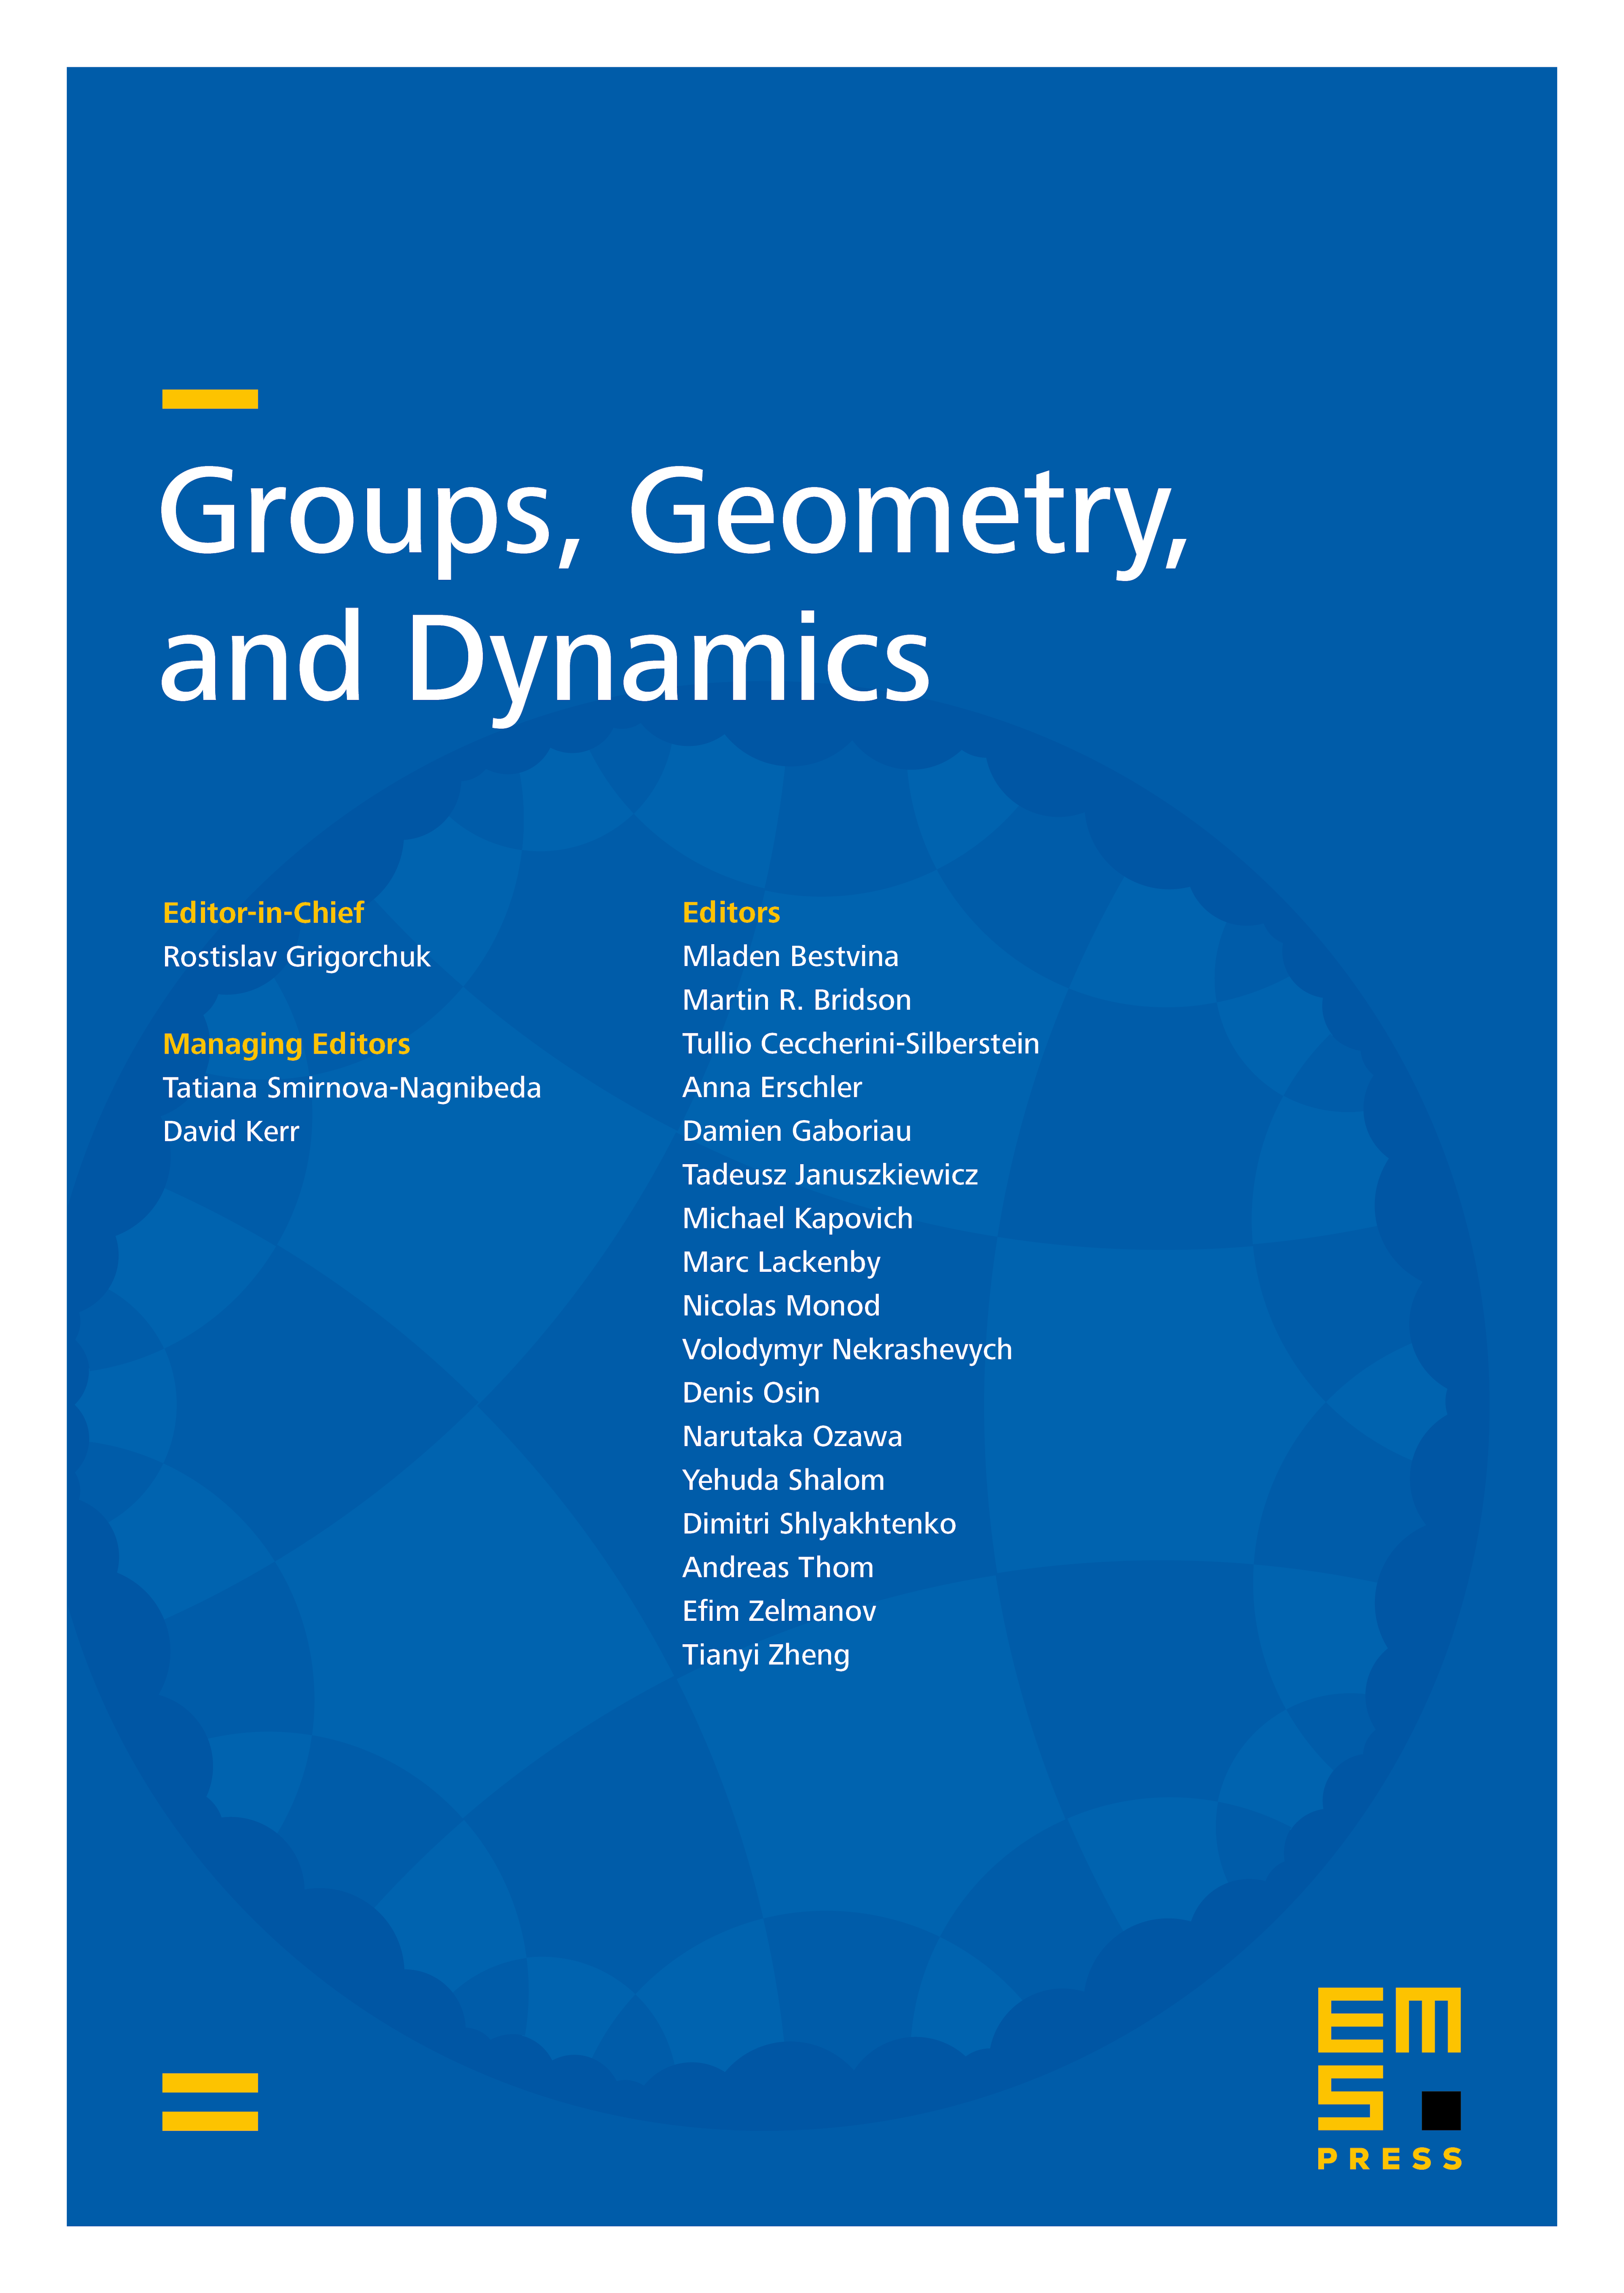 Hyperbolic groupoids: metric and measure cover